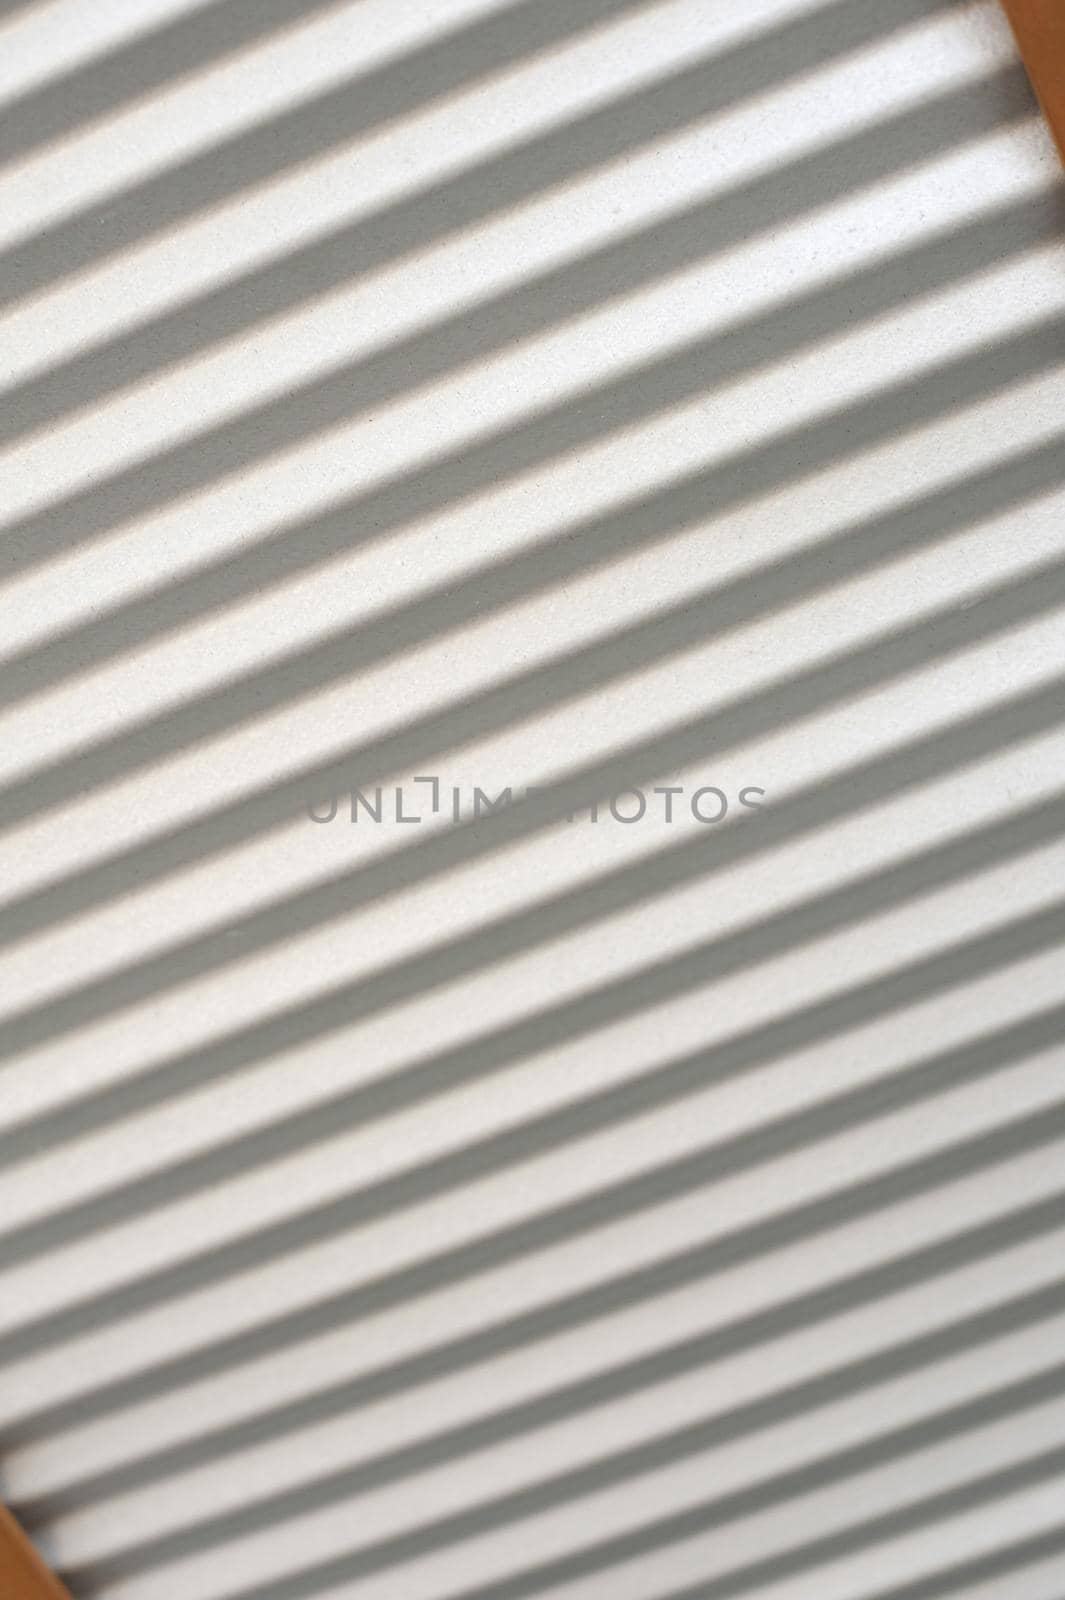 Corrugated metal sheeting with diagonal lines in a tilted view of cladding, a shutter or door in a full frame background texture and pattern